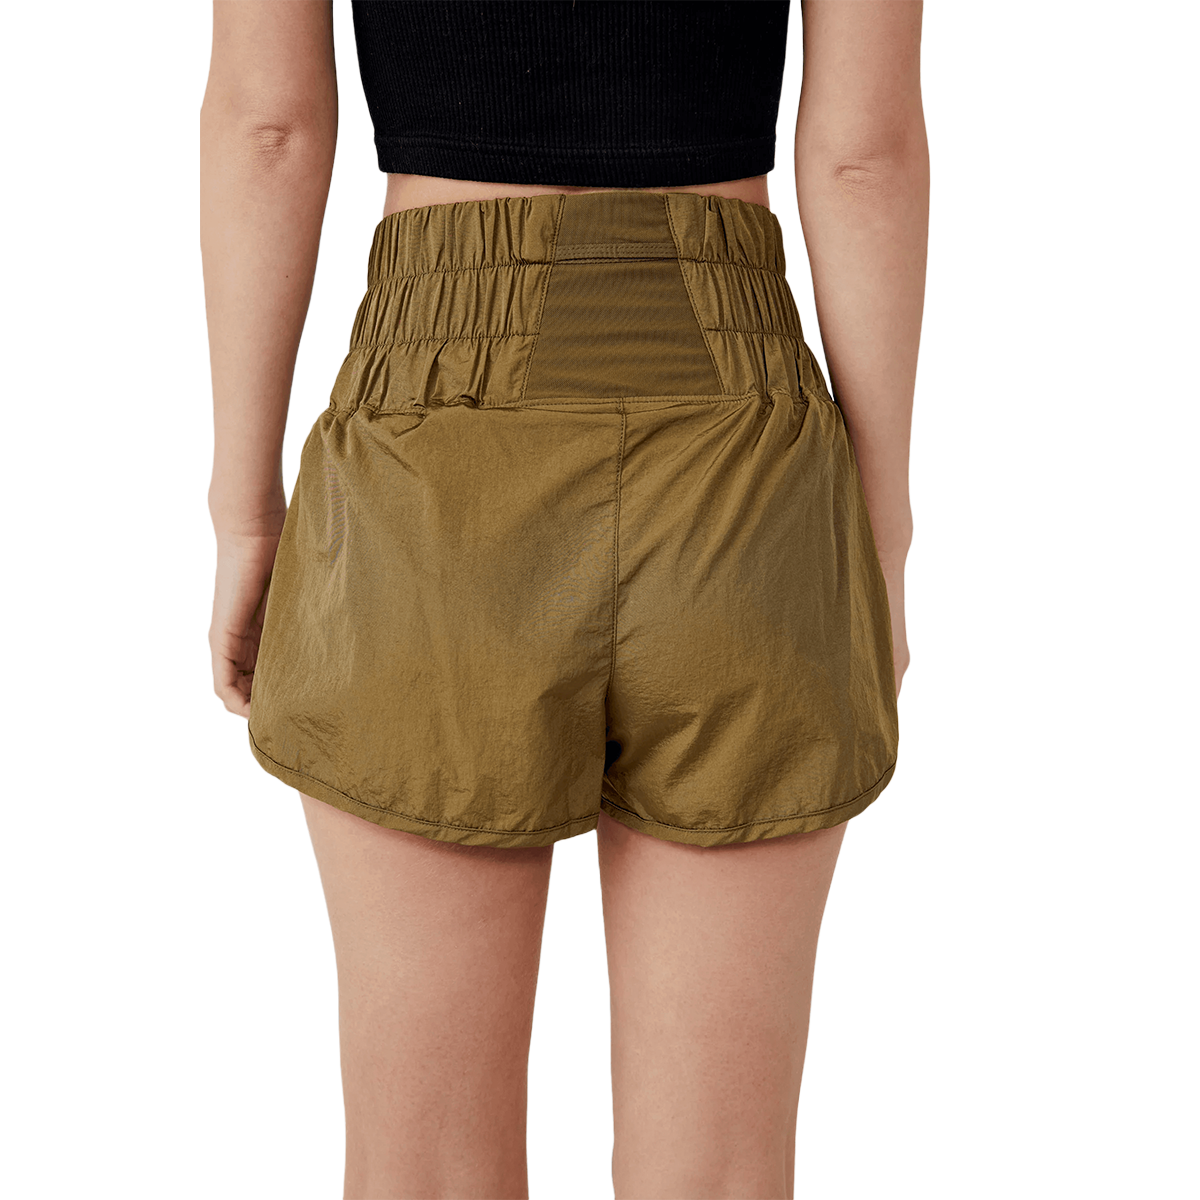 Free People Way Home Short, , large image number null